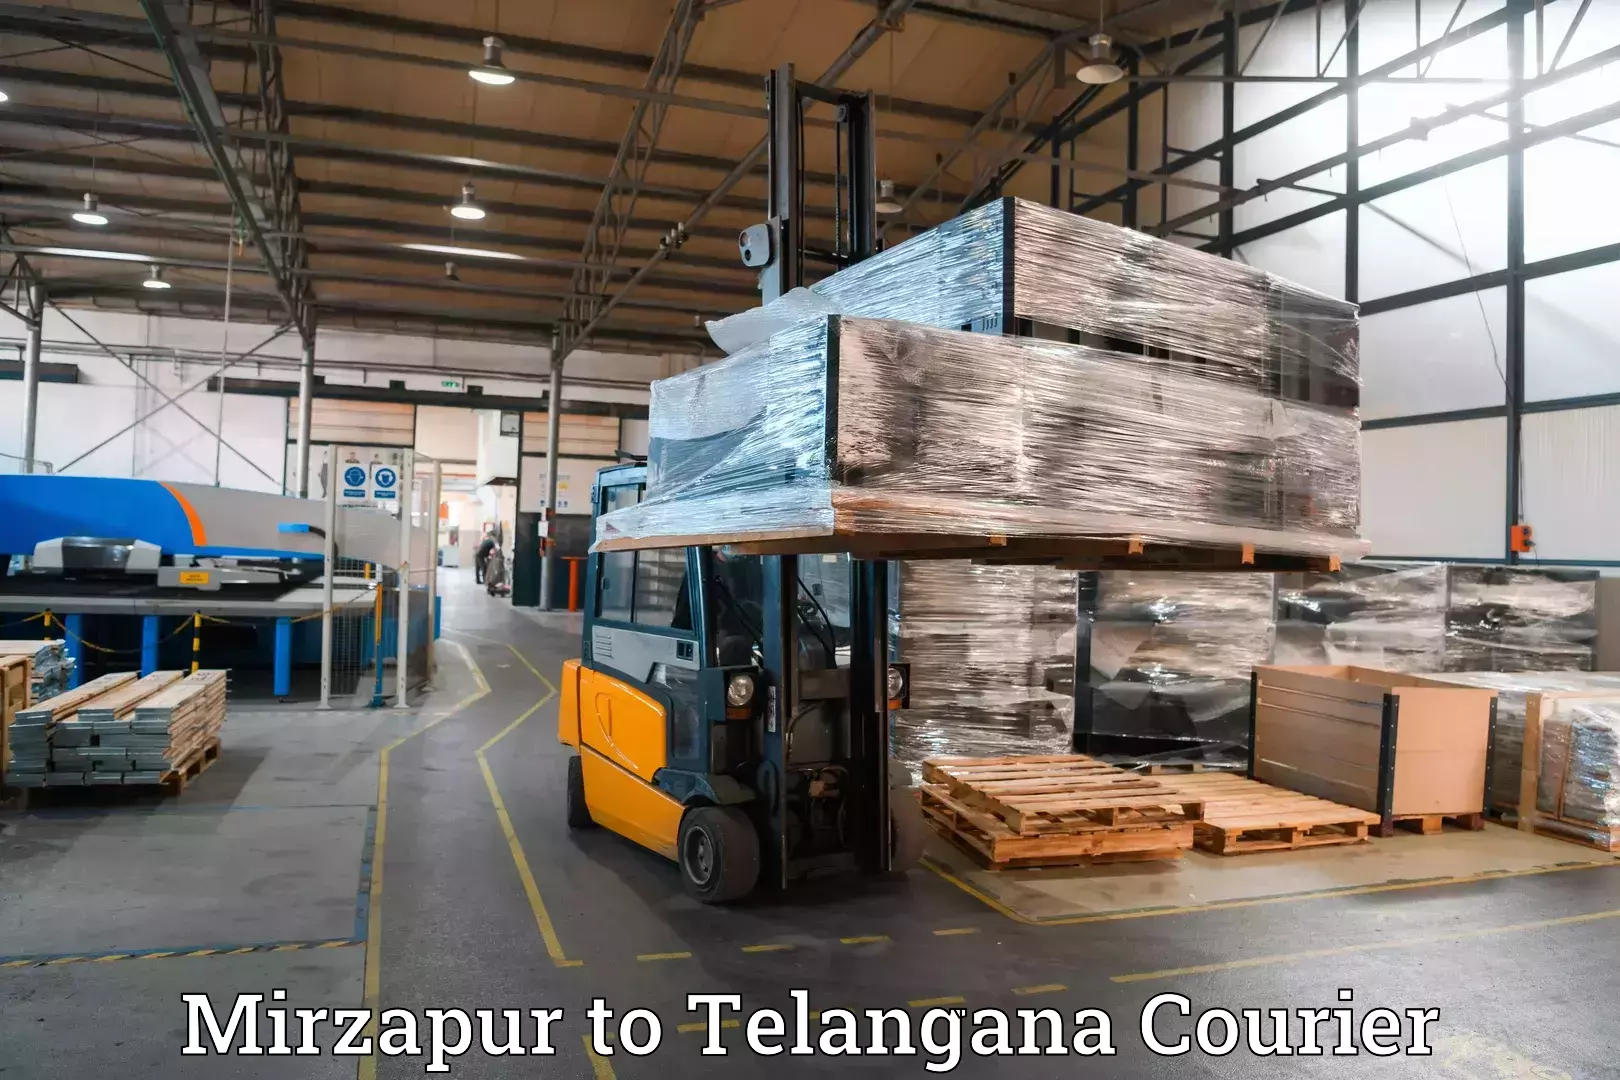 Luggage delivery network Mirzapur to Kacheguda